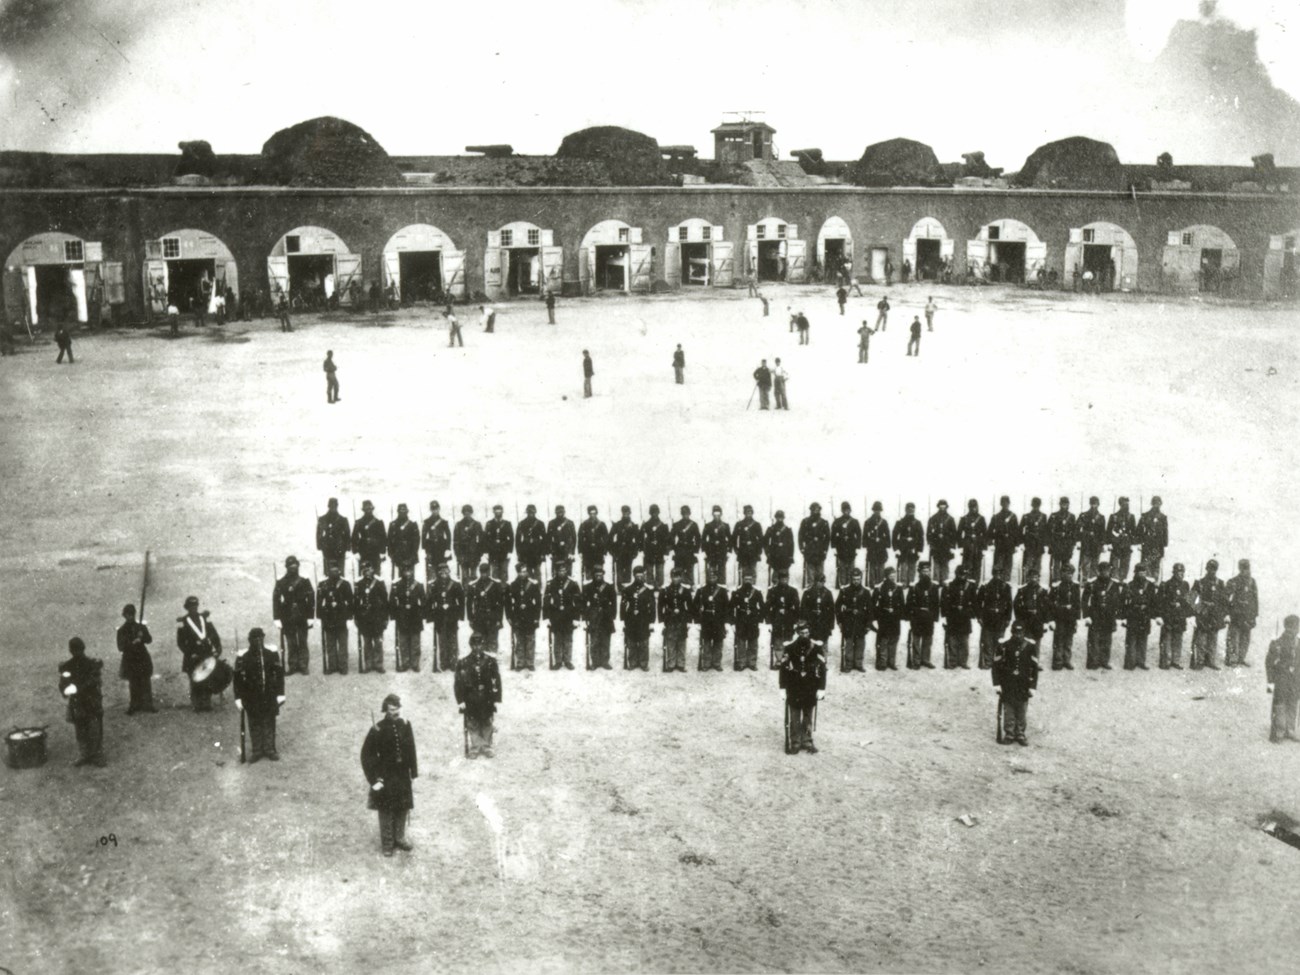 Two lines of soldiers with a group of men playing baseball in the rear.